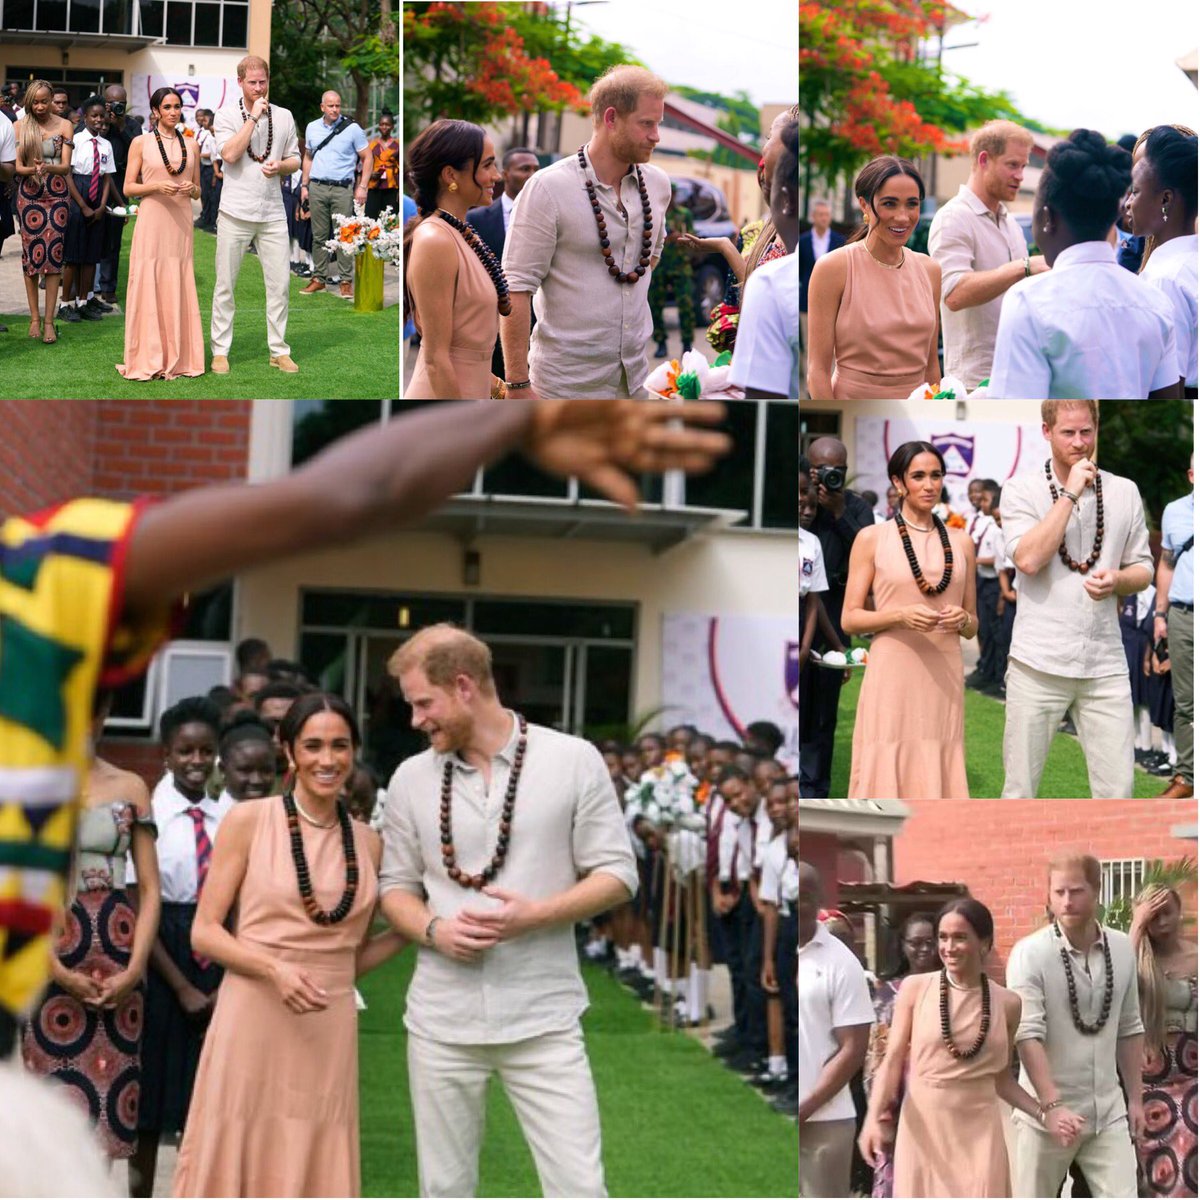 This is one of the highest honors you can receive as a guest. To be dressed in prepared agbada shows you're now part of the family. #PrinceHarry has been fully embraced by Nigerians. Rankadede Alhaji Harry! Founder of the #InvictusGames 💛🖤 🇳🇬.